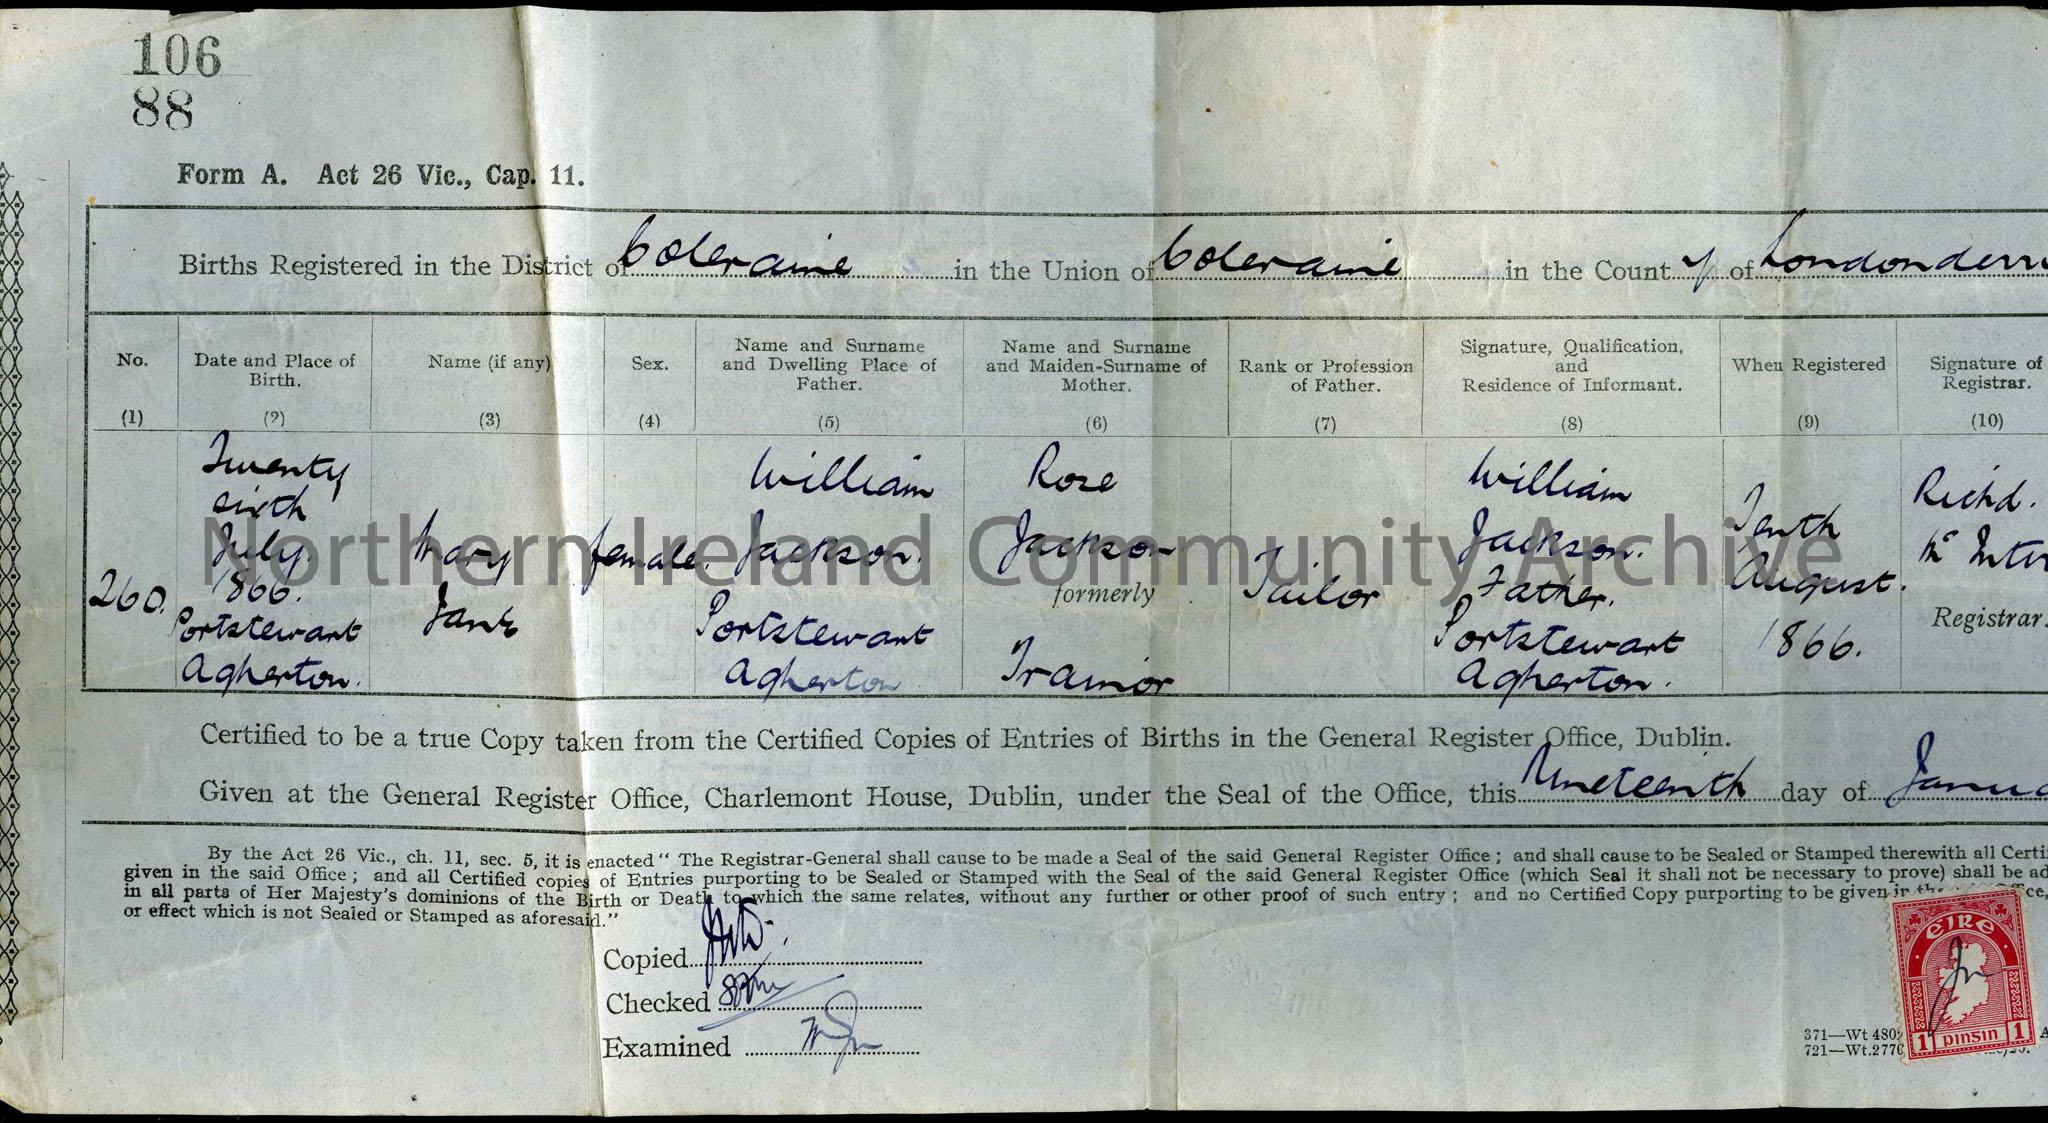 1927 copy of birth certificate for Mary Rose Jackson, Agherton, Portstewart. Gives her date of birth as 26.7.1866.